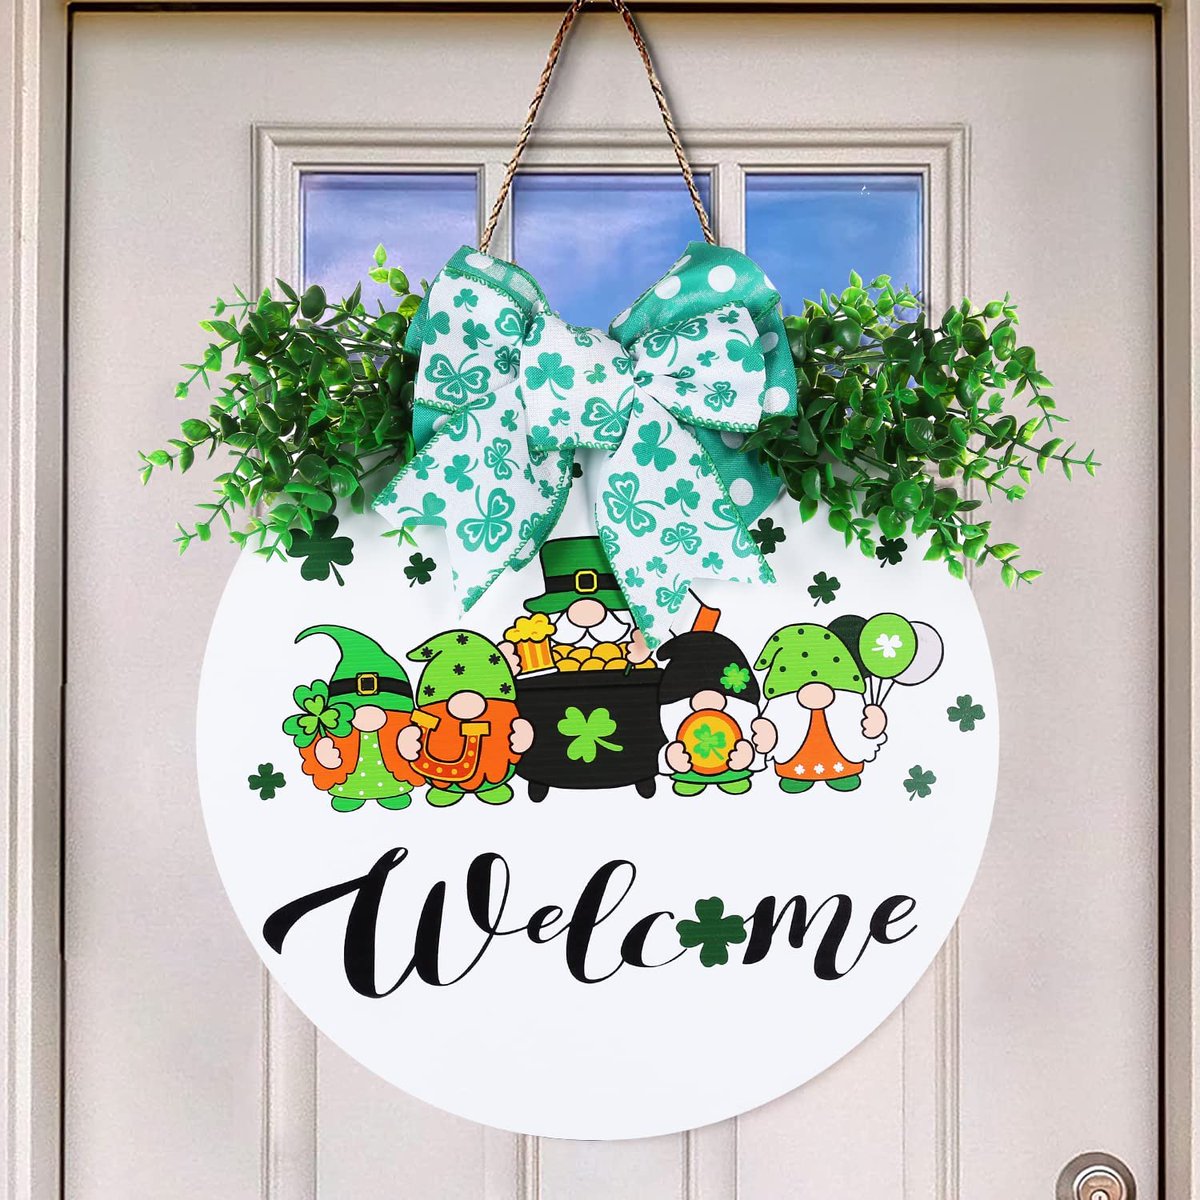 St Patrick Day Decor around $25 For more details or to order today, copy/paste or click the link below 
                👇👇
amzn.to/3KtNmqZ  or go to BigMamasBins.com

#stpatricksdaydecor  #gnomes #farmhousewreath #bigmamasbins #AdSponsor